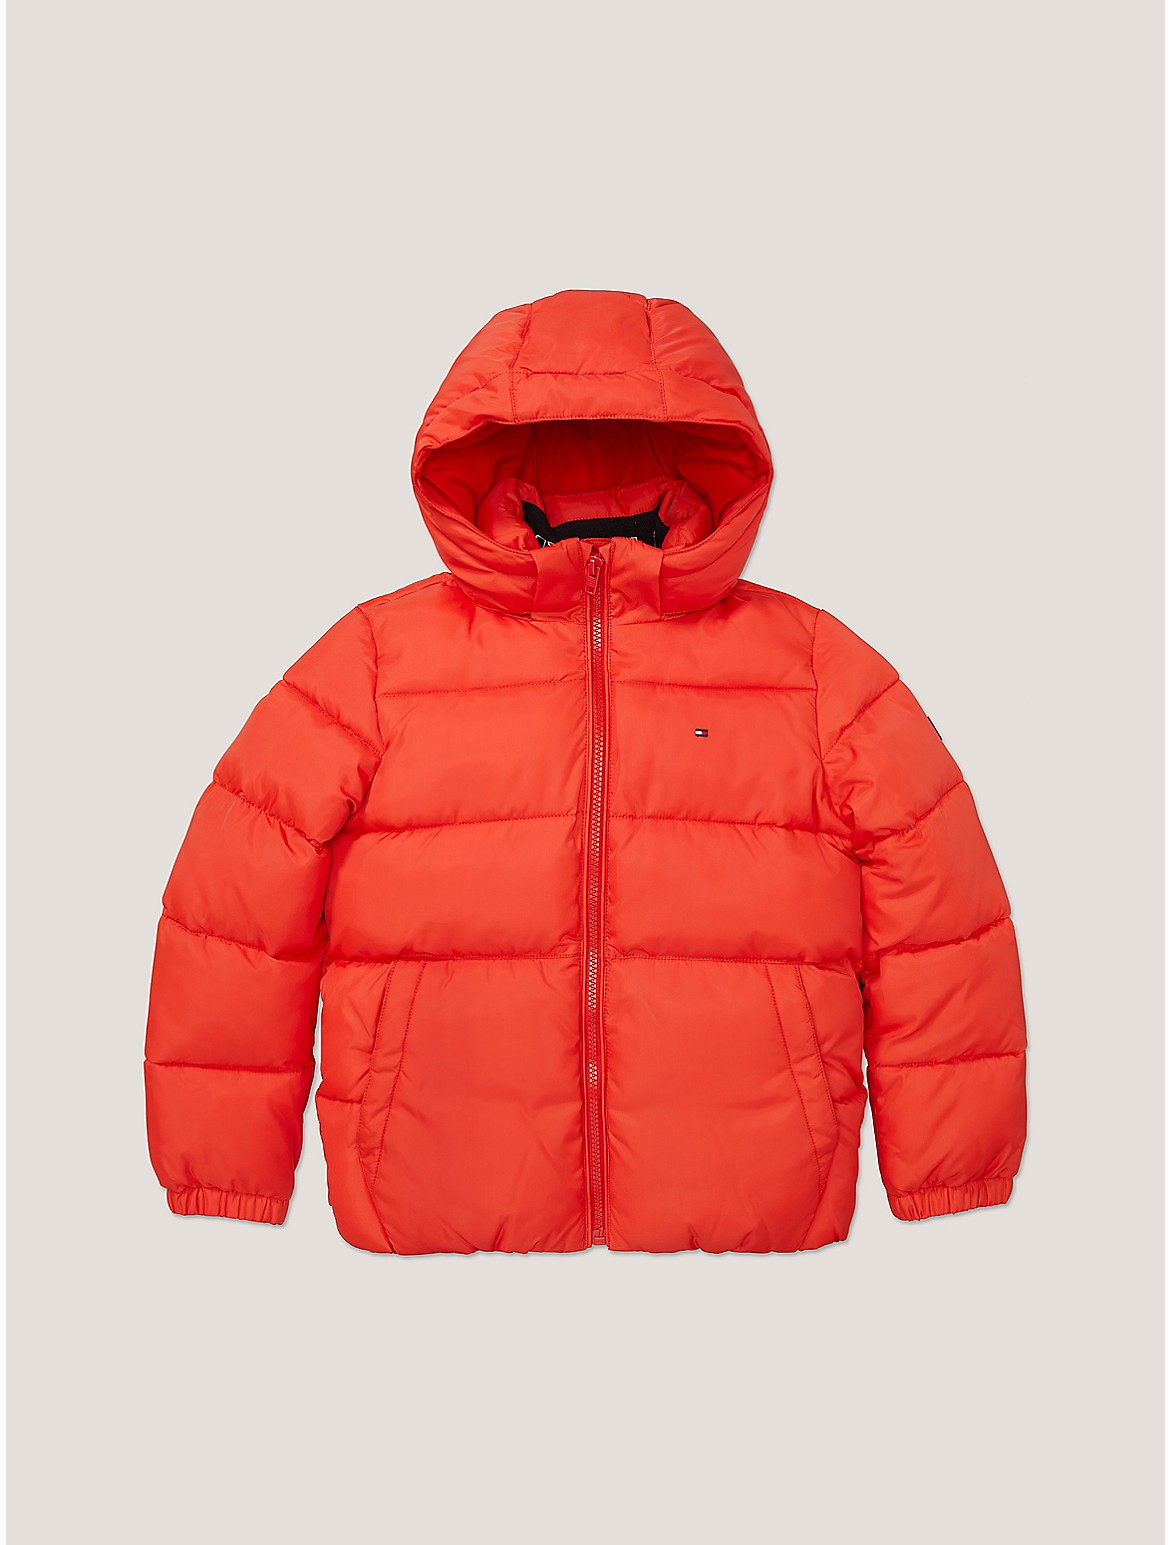 Tommy Hilfiger Boys' Kids' Flag Hooded Puffer - Red - XXS